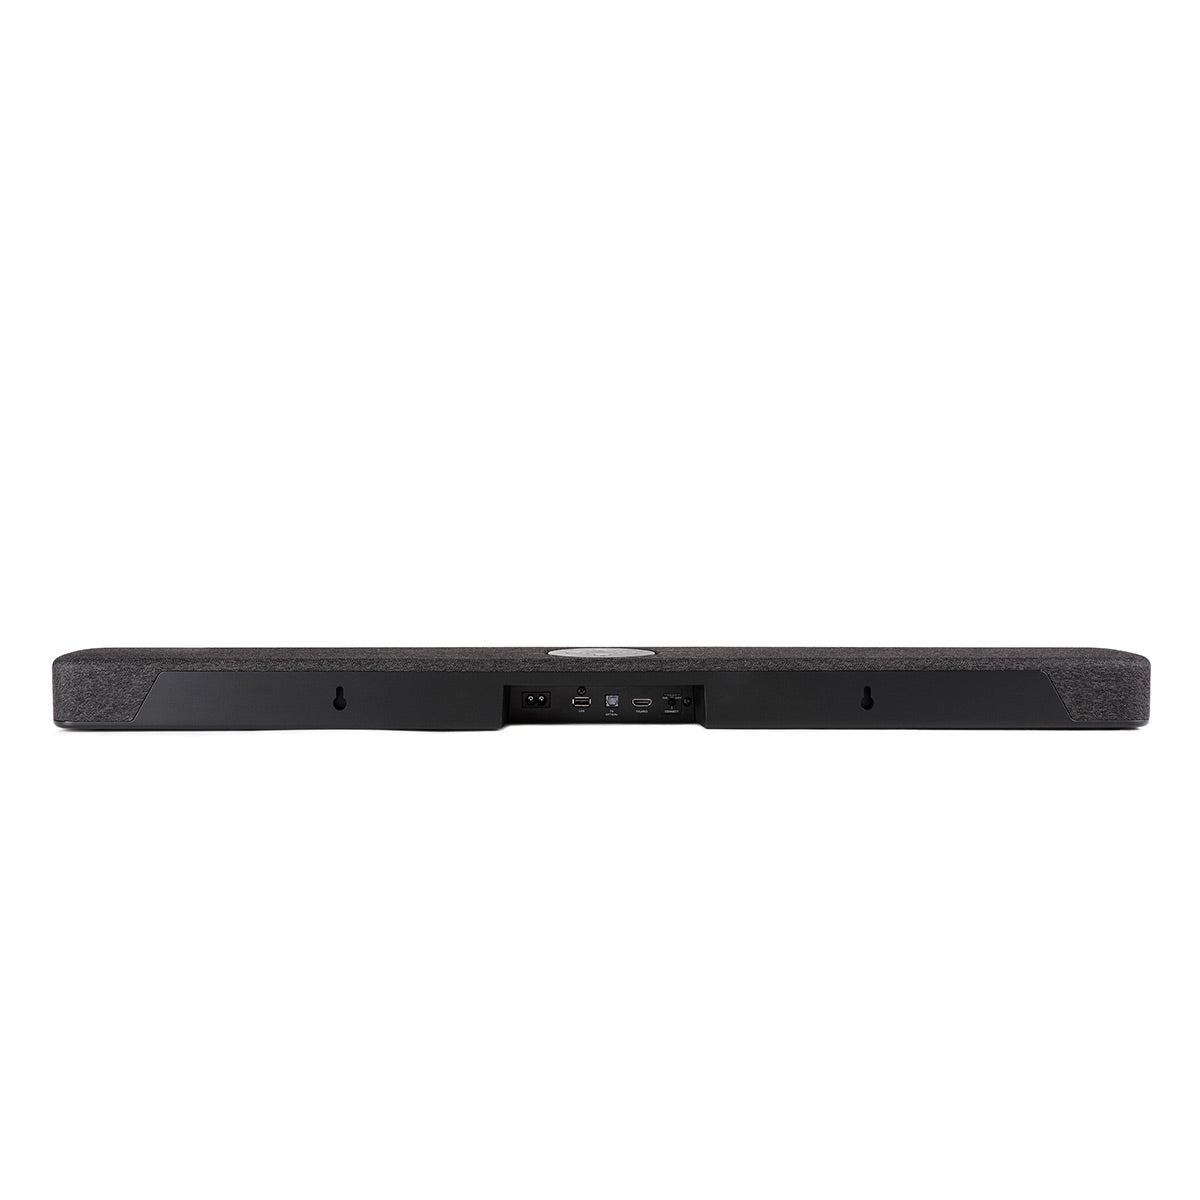 Polk Audio True Surround III 5.1 Channel Wireless Surround Sound System,  Includes Sound Bar, L & R Rear Surrounds and 7'' Subwoofer, Dolby Digital